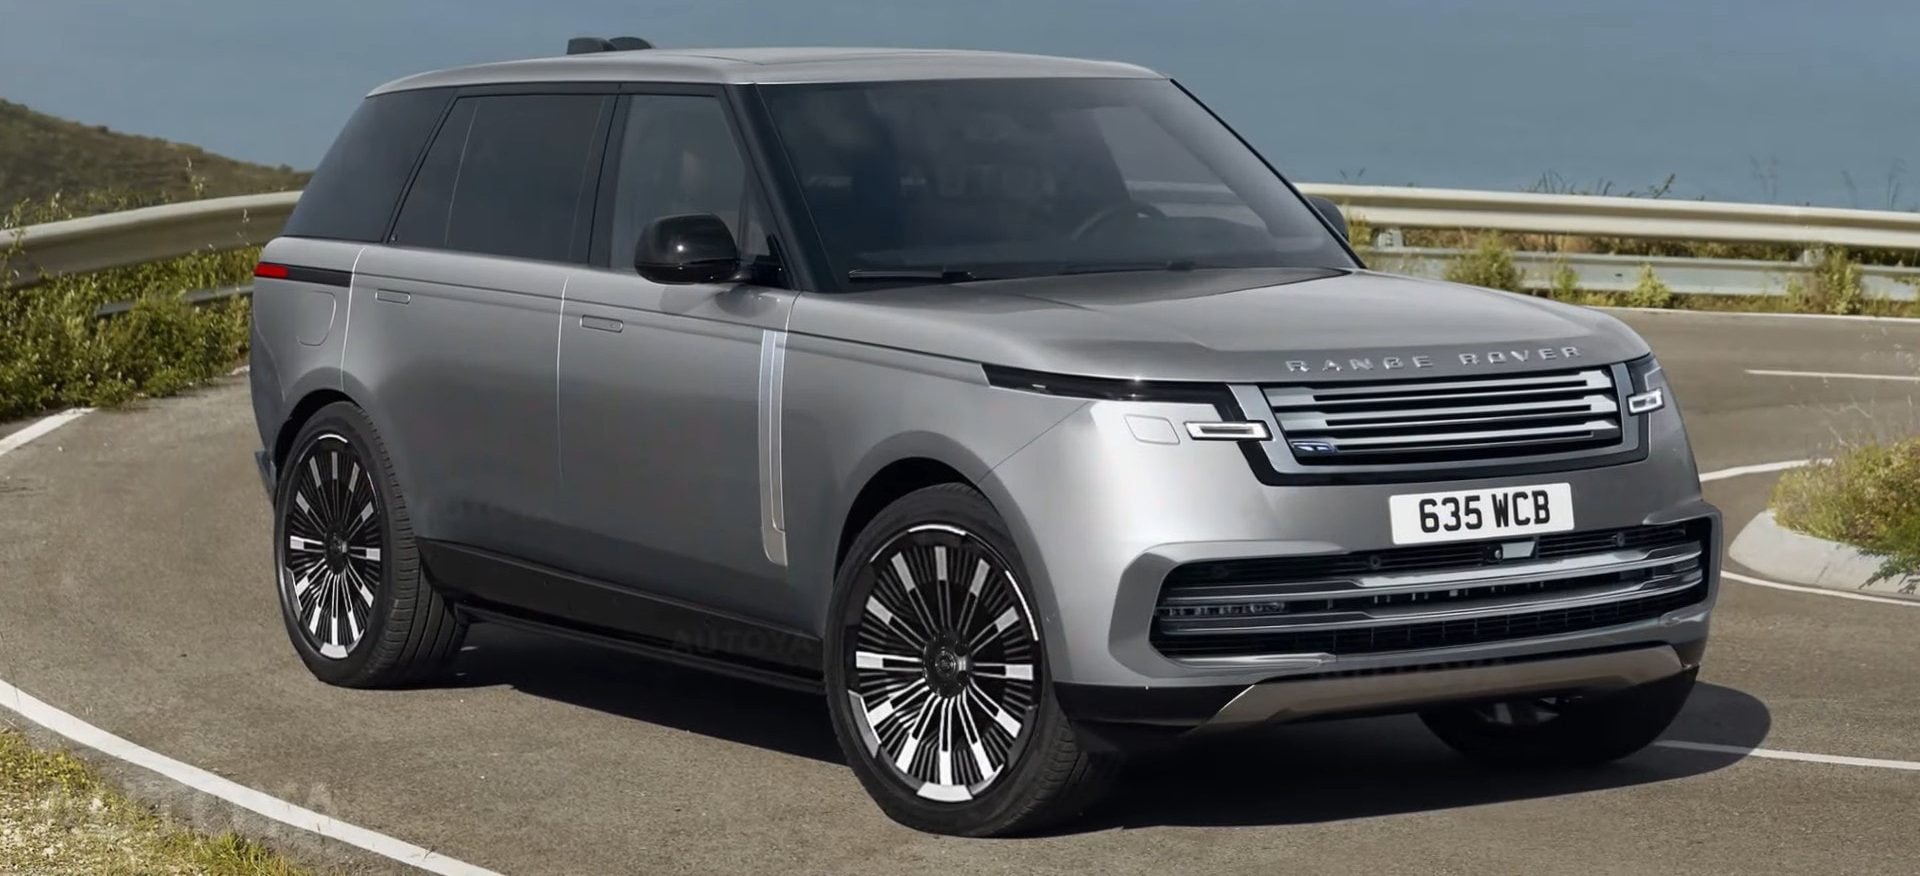 Land Rover's Electric Vision